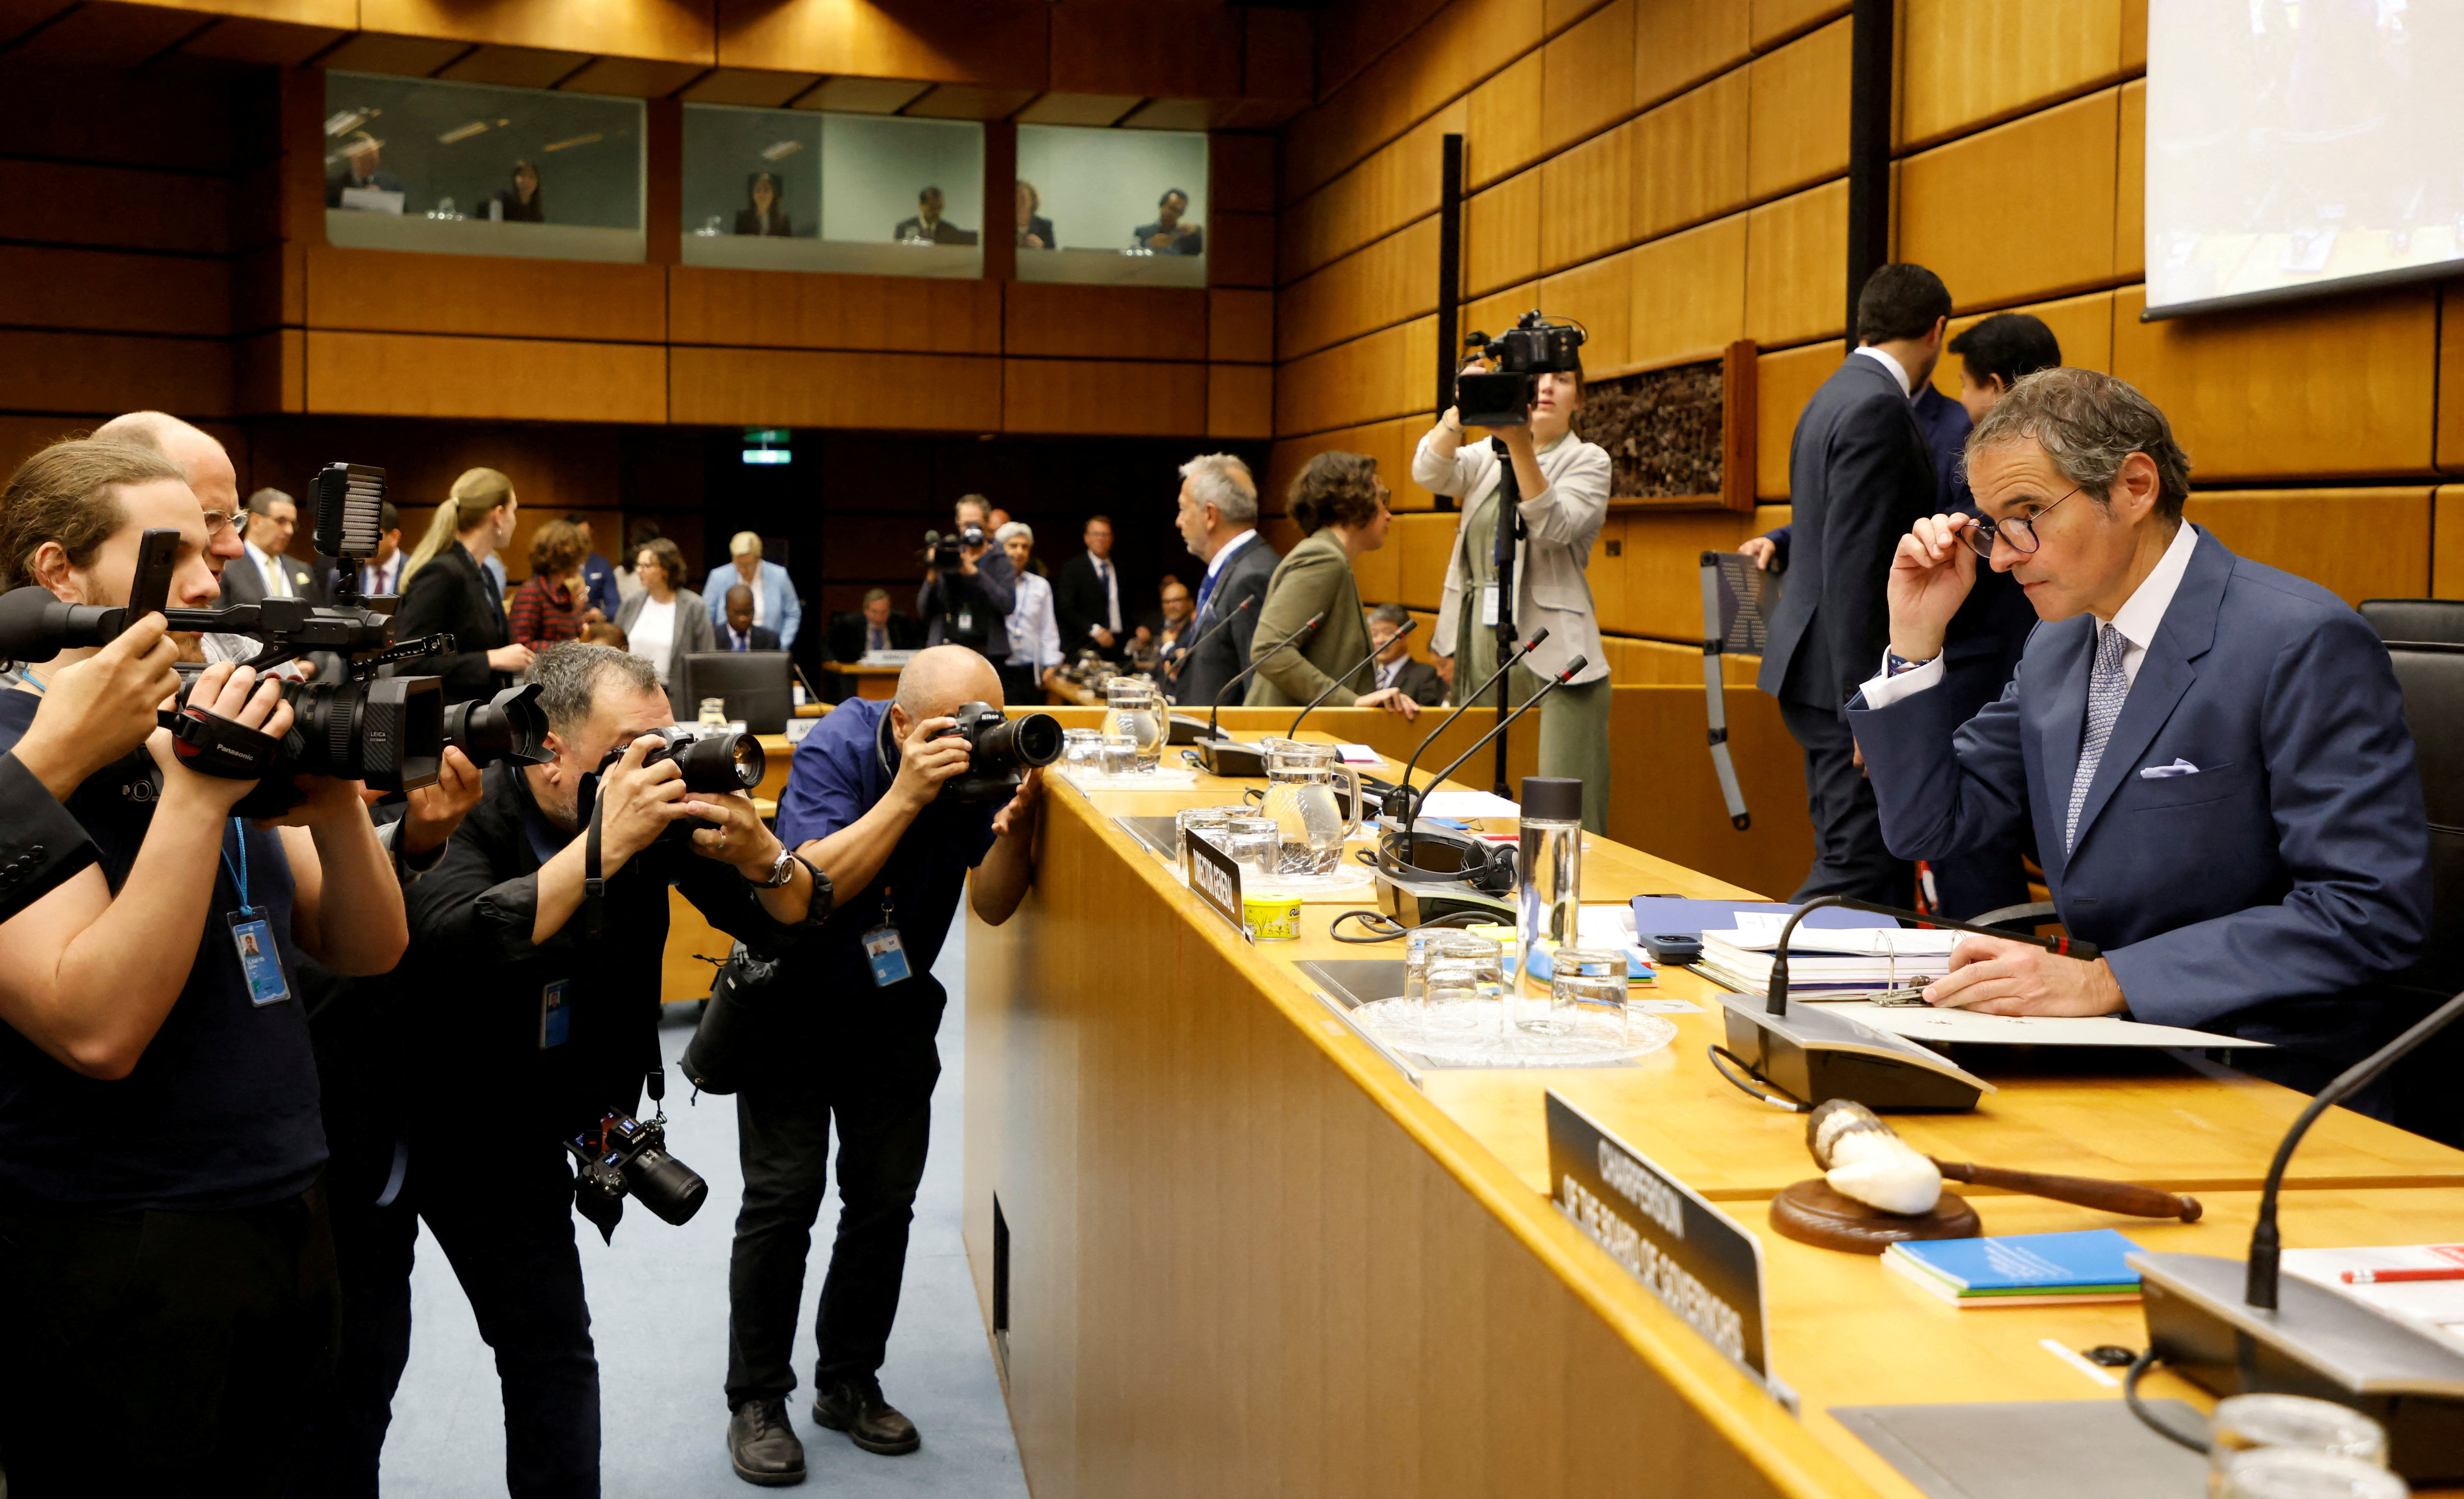 IAEA Director General Rafael Grossi waits for the start of an IAEA board of governors meeting in Vienna